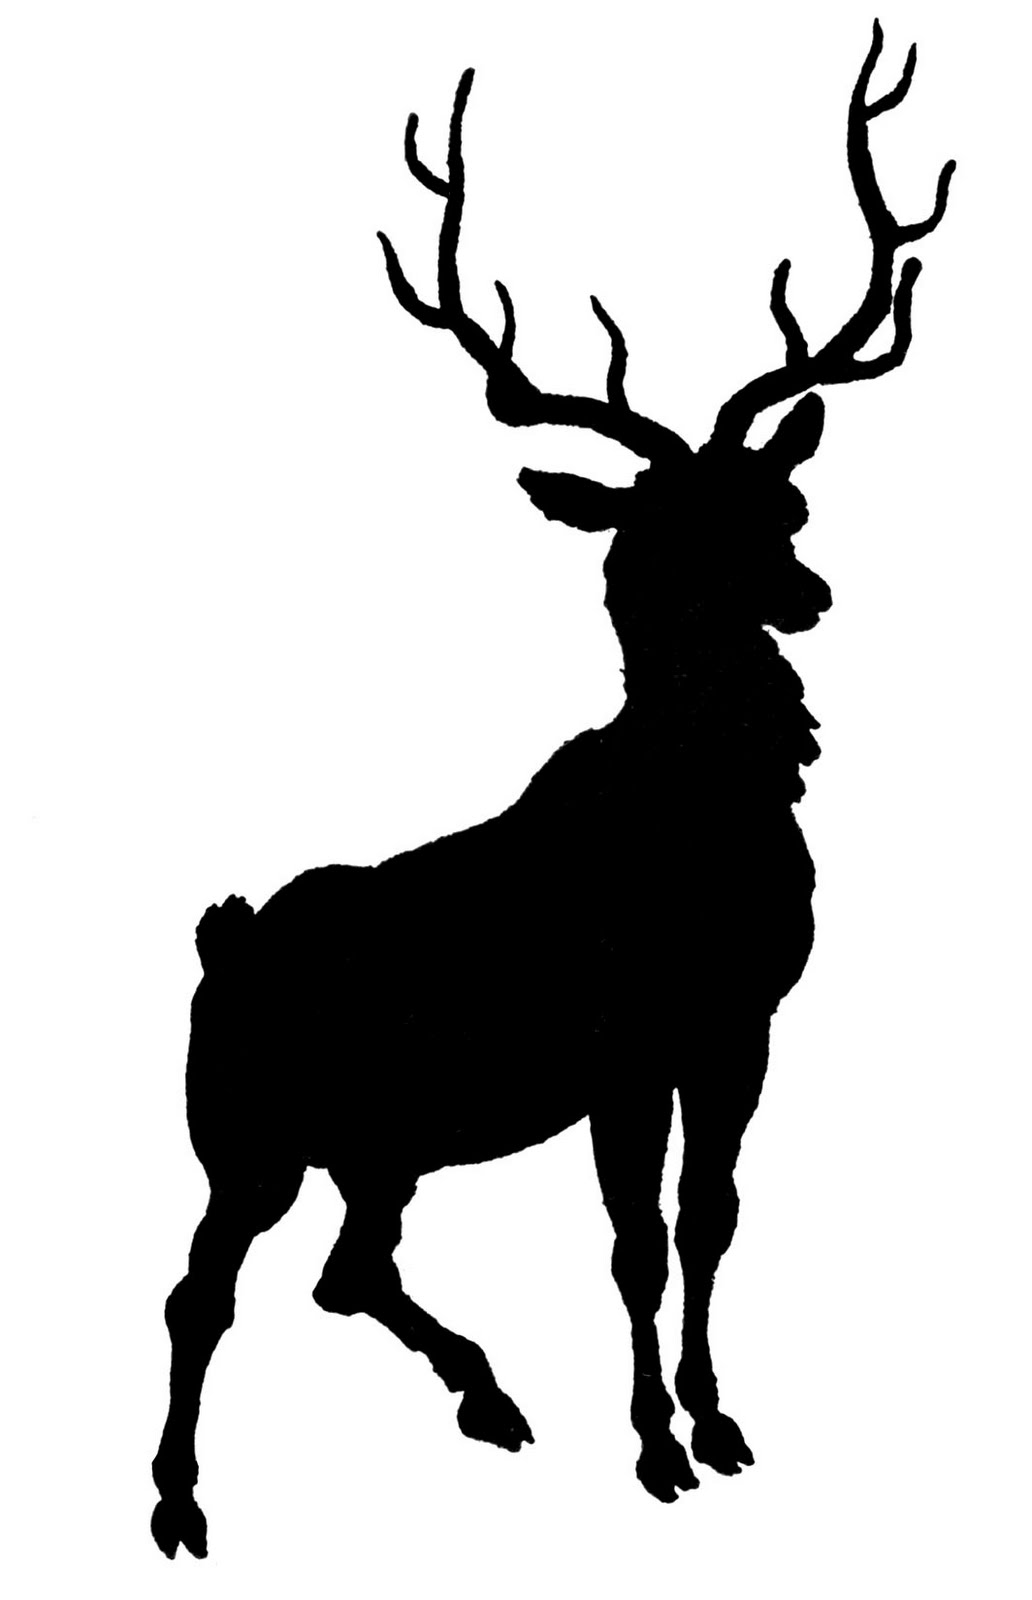 Vintage clip art deer with antlers silhouette the graphics fairy